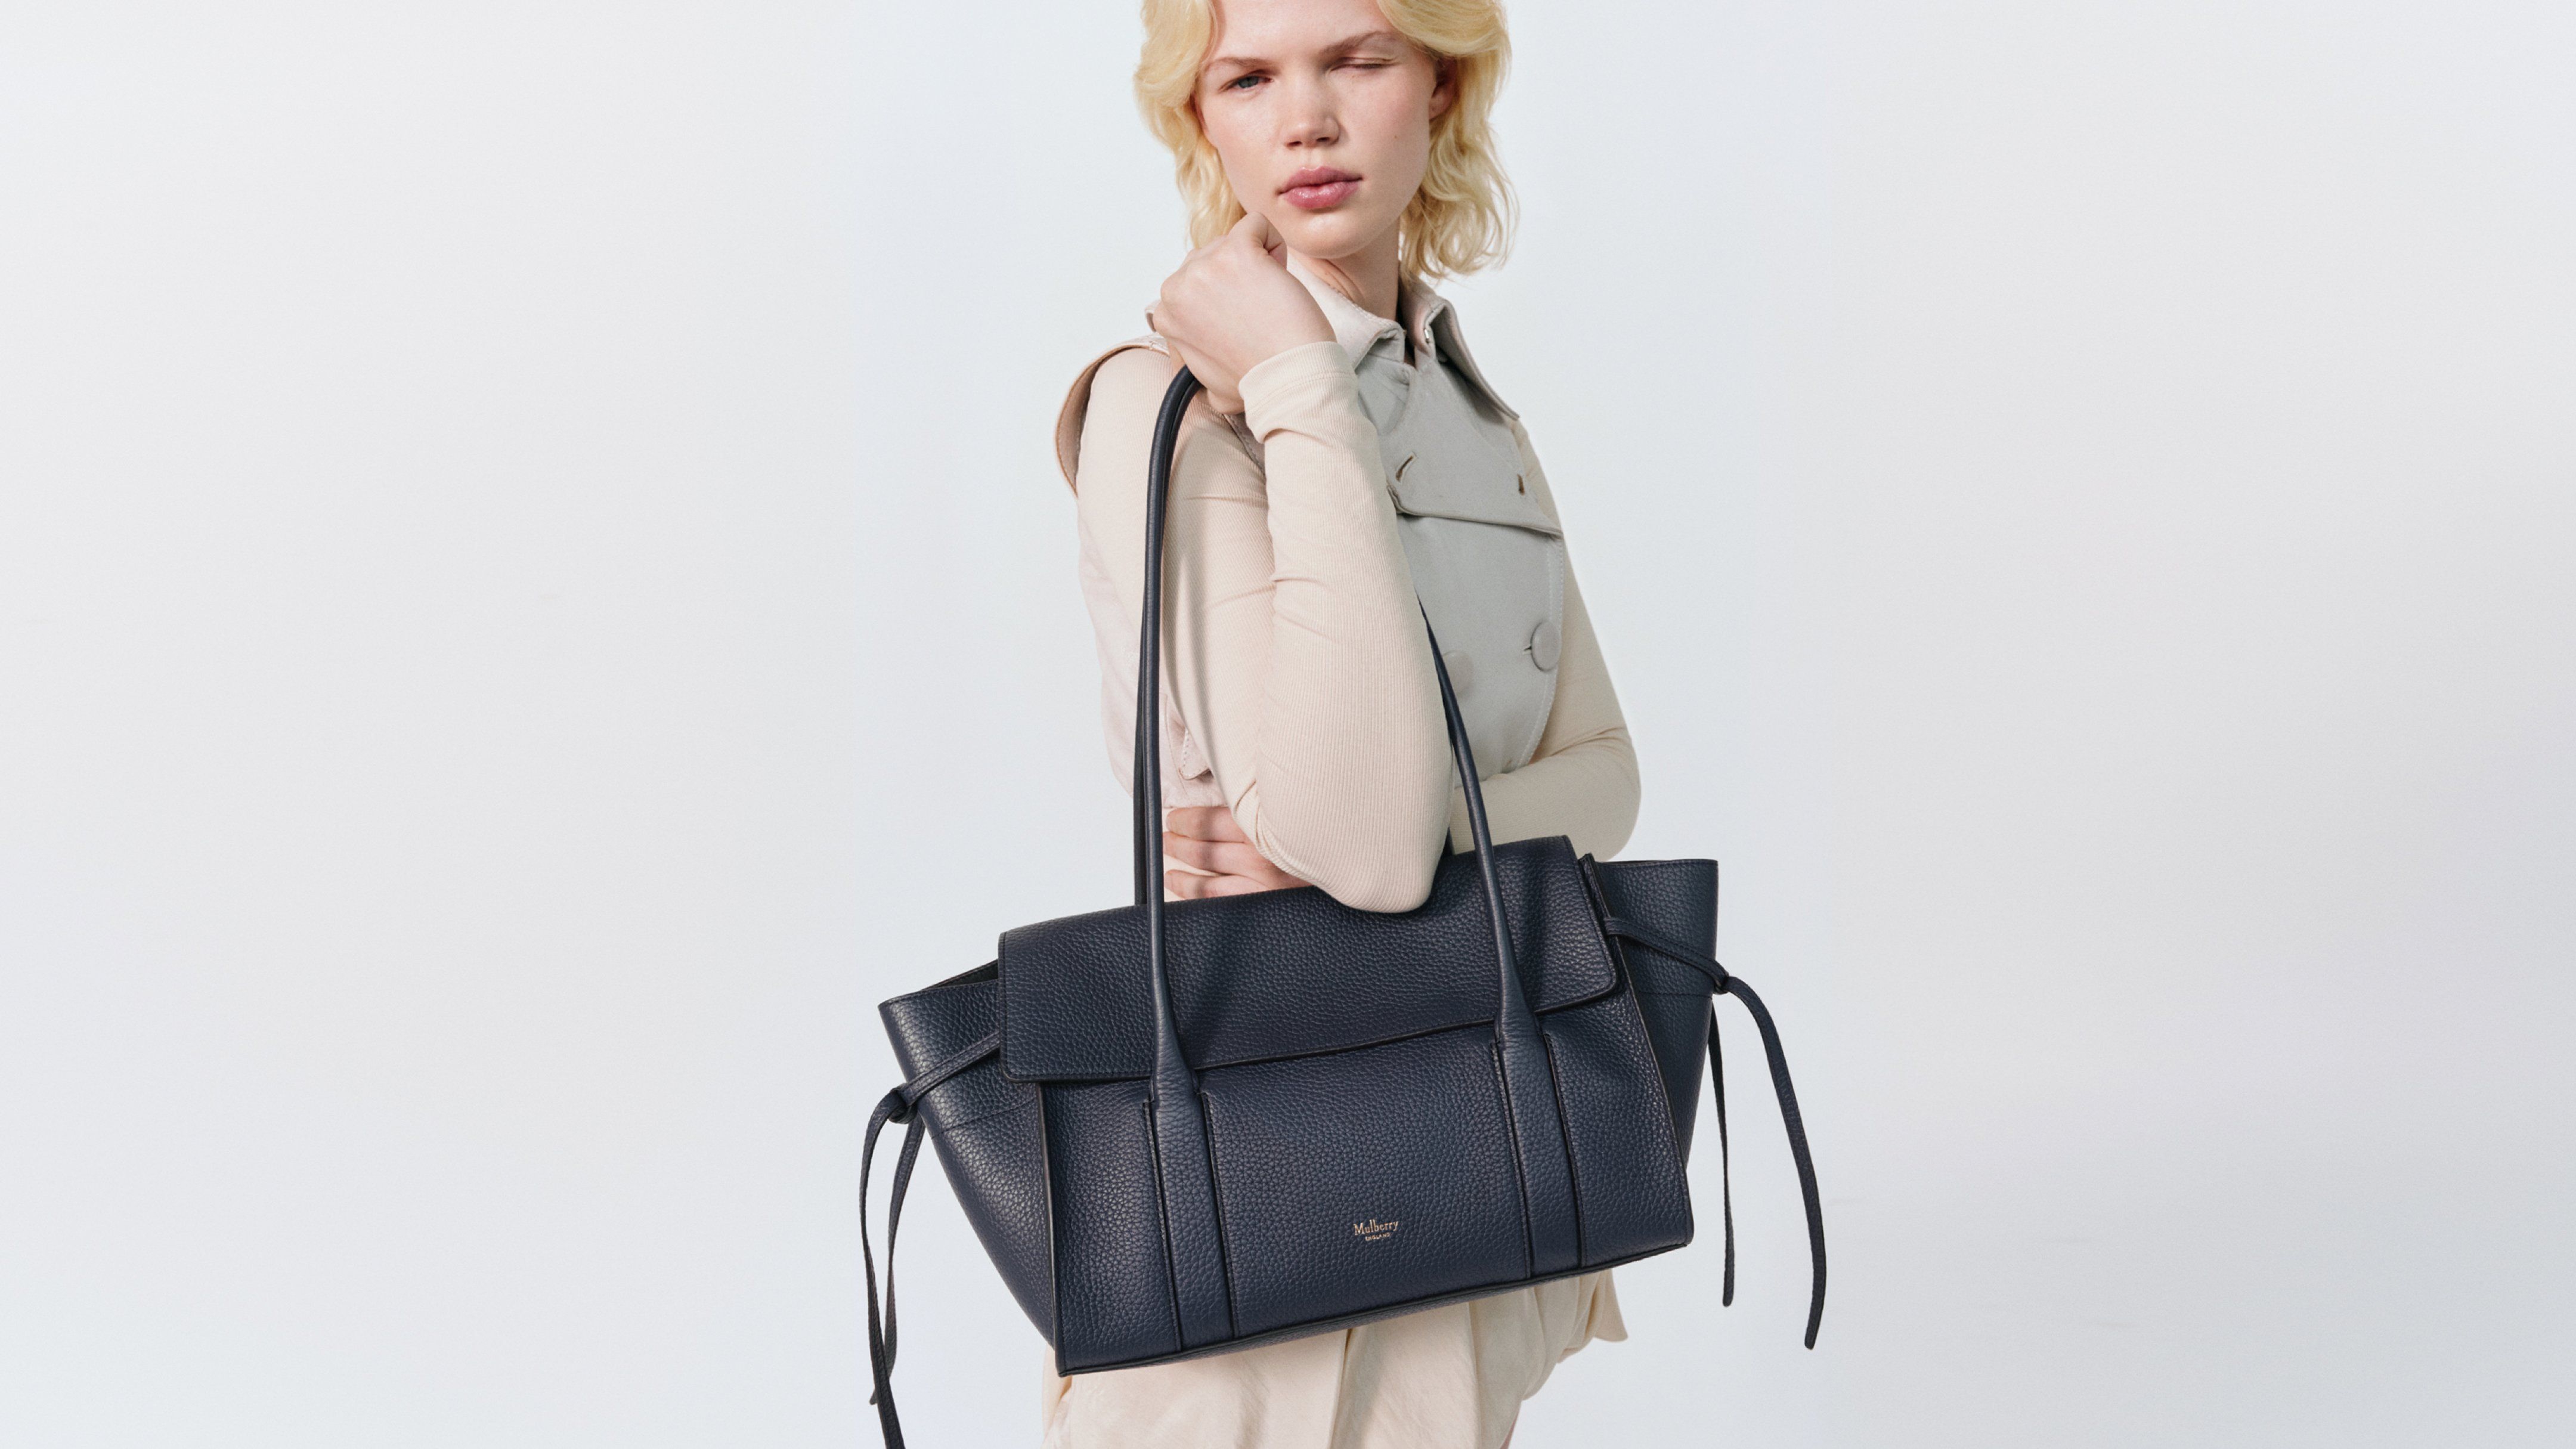 Model wearing the Mulberry Soft Bayswater handbag in navy leather